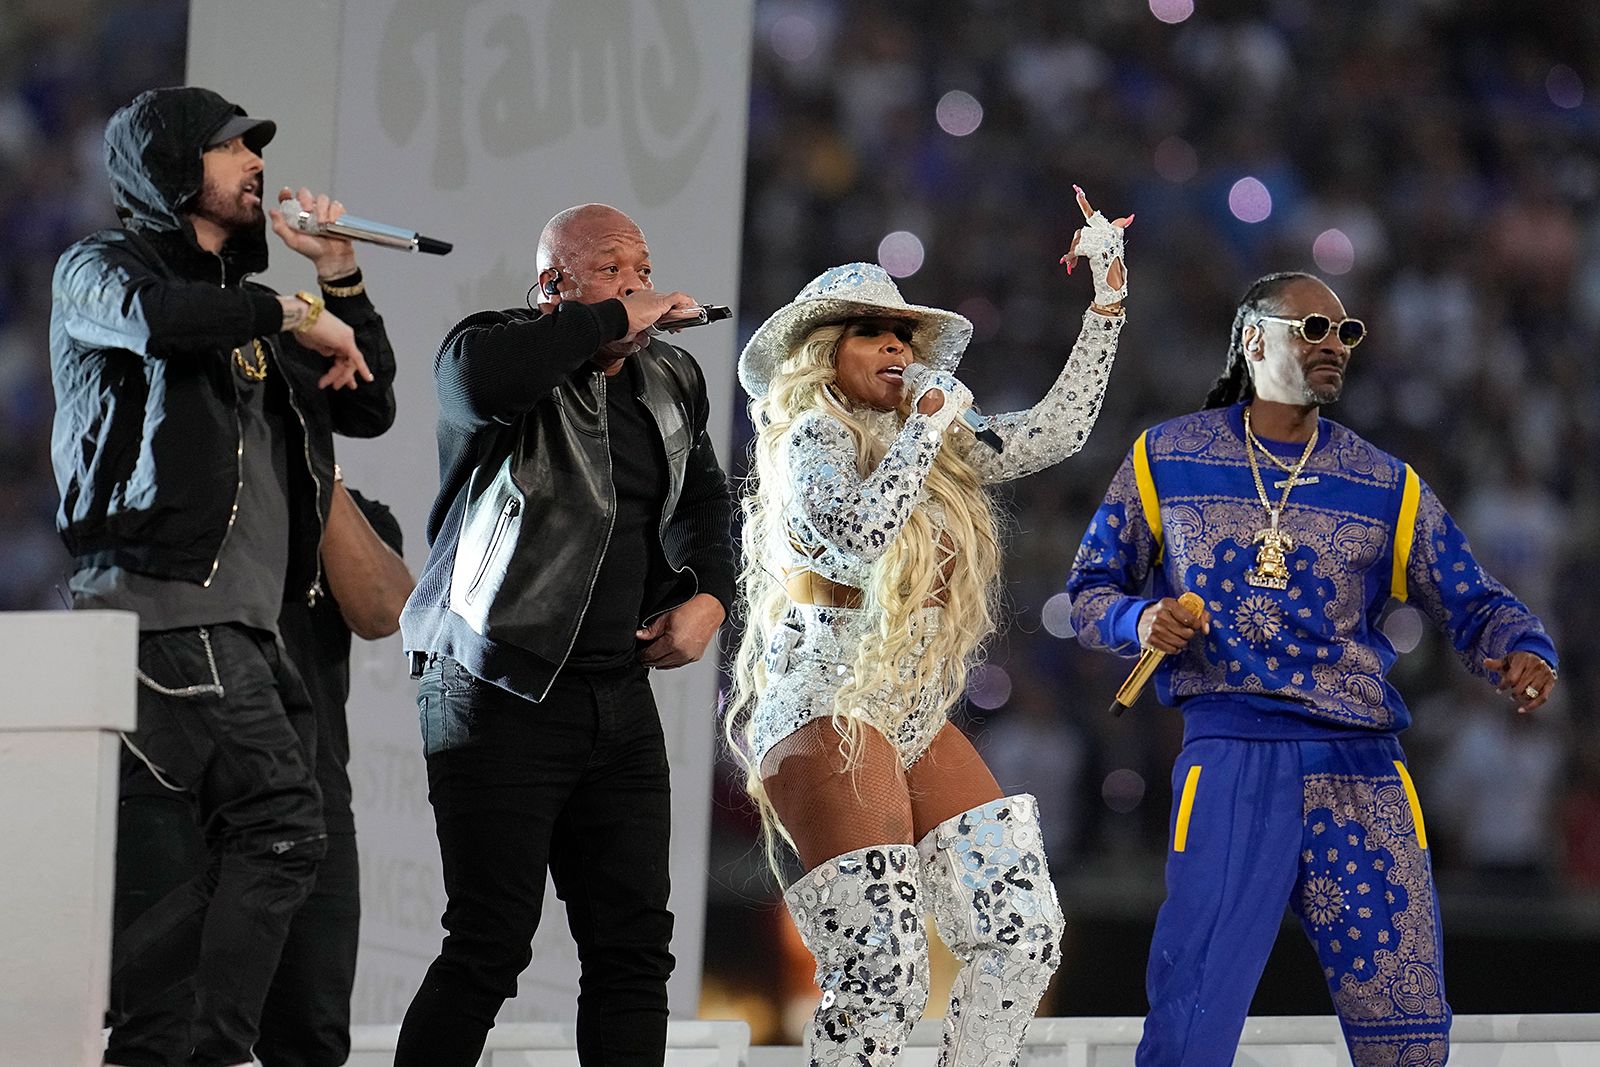 Mary J. Blige Goes Viral for Dramatic Exit From Super Bowl Halftime Show